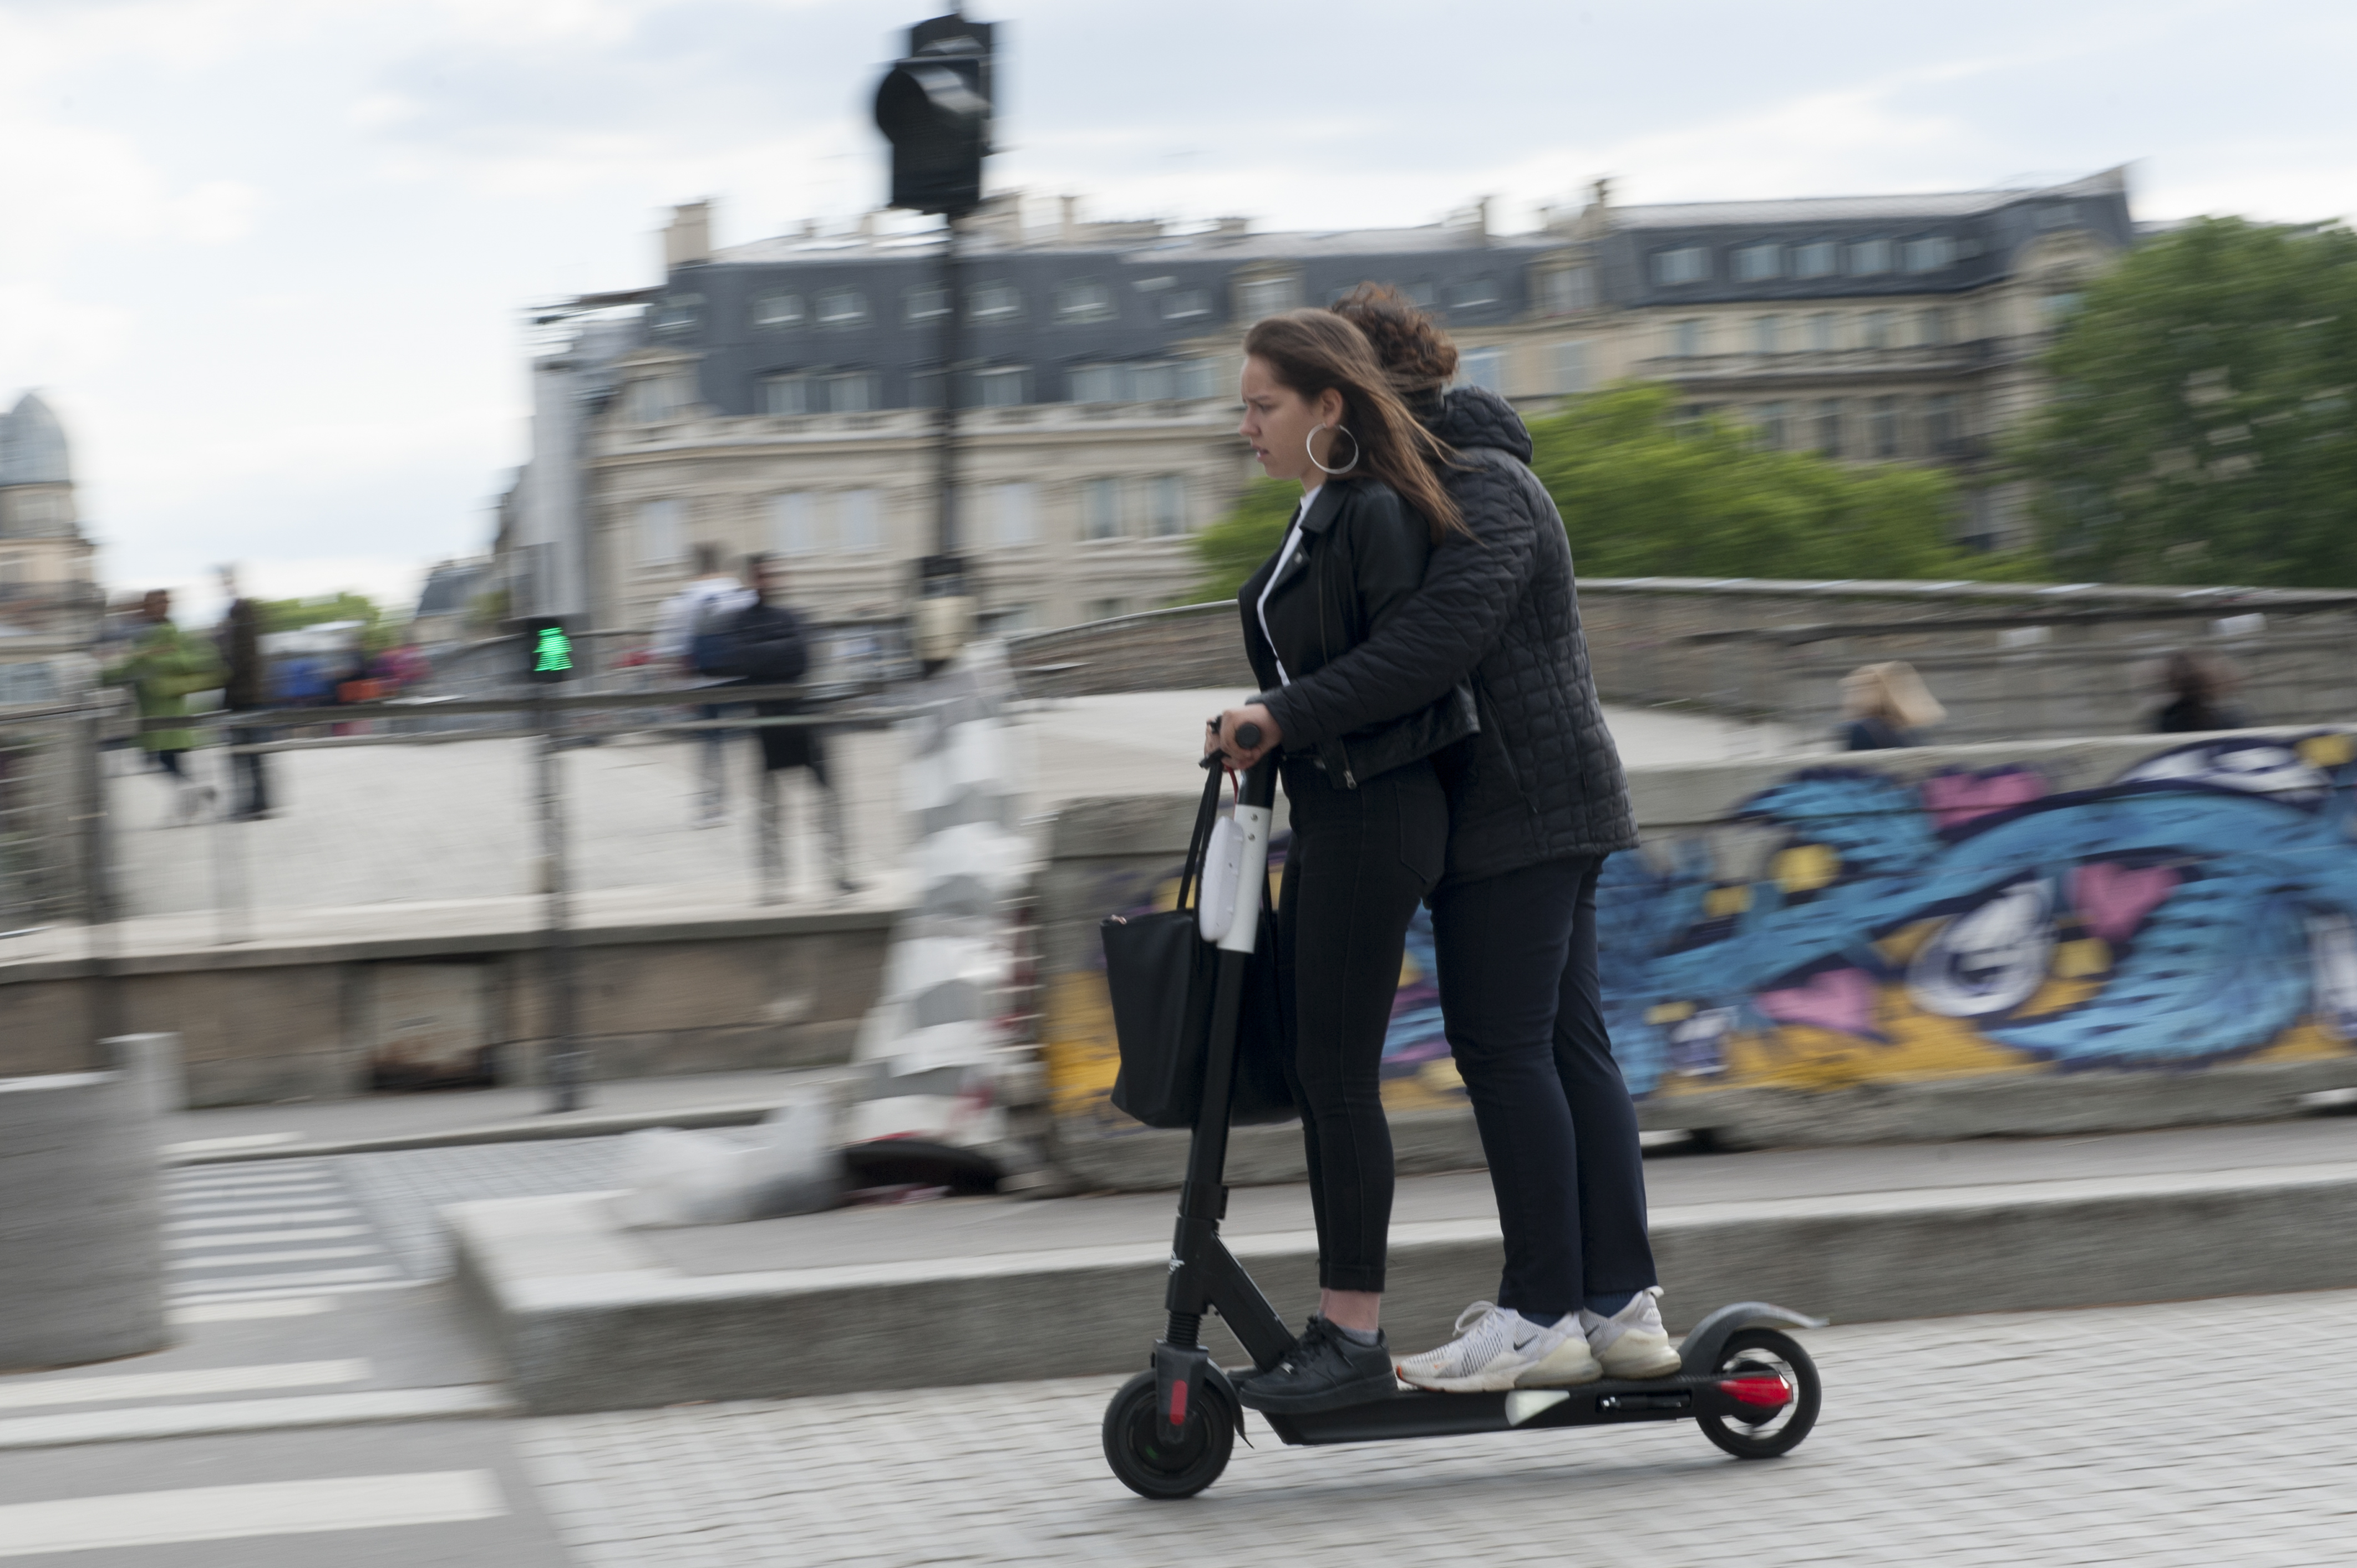 Paris threatens to ban e-scooters after deadly incidents